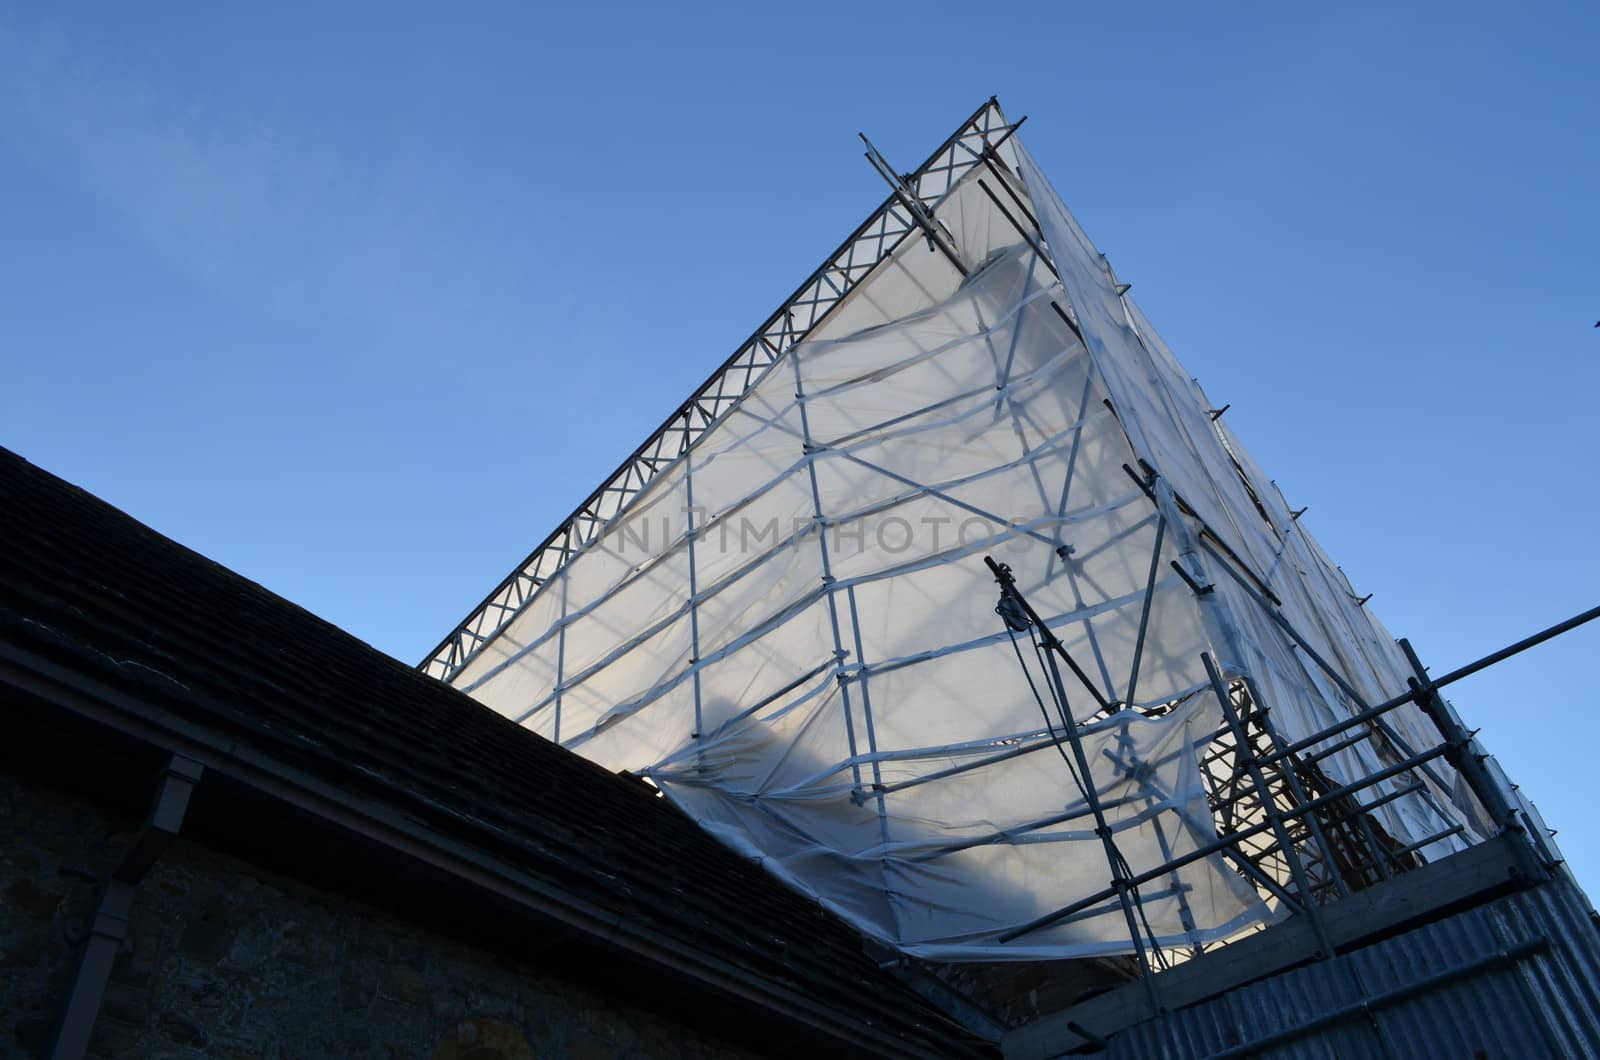 A building being renovated under a framework of metal scaffolding and plastic sheeting.